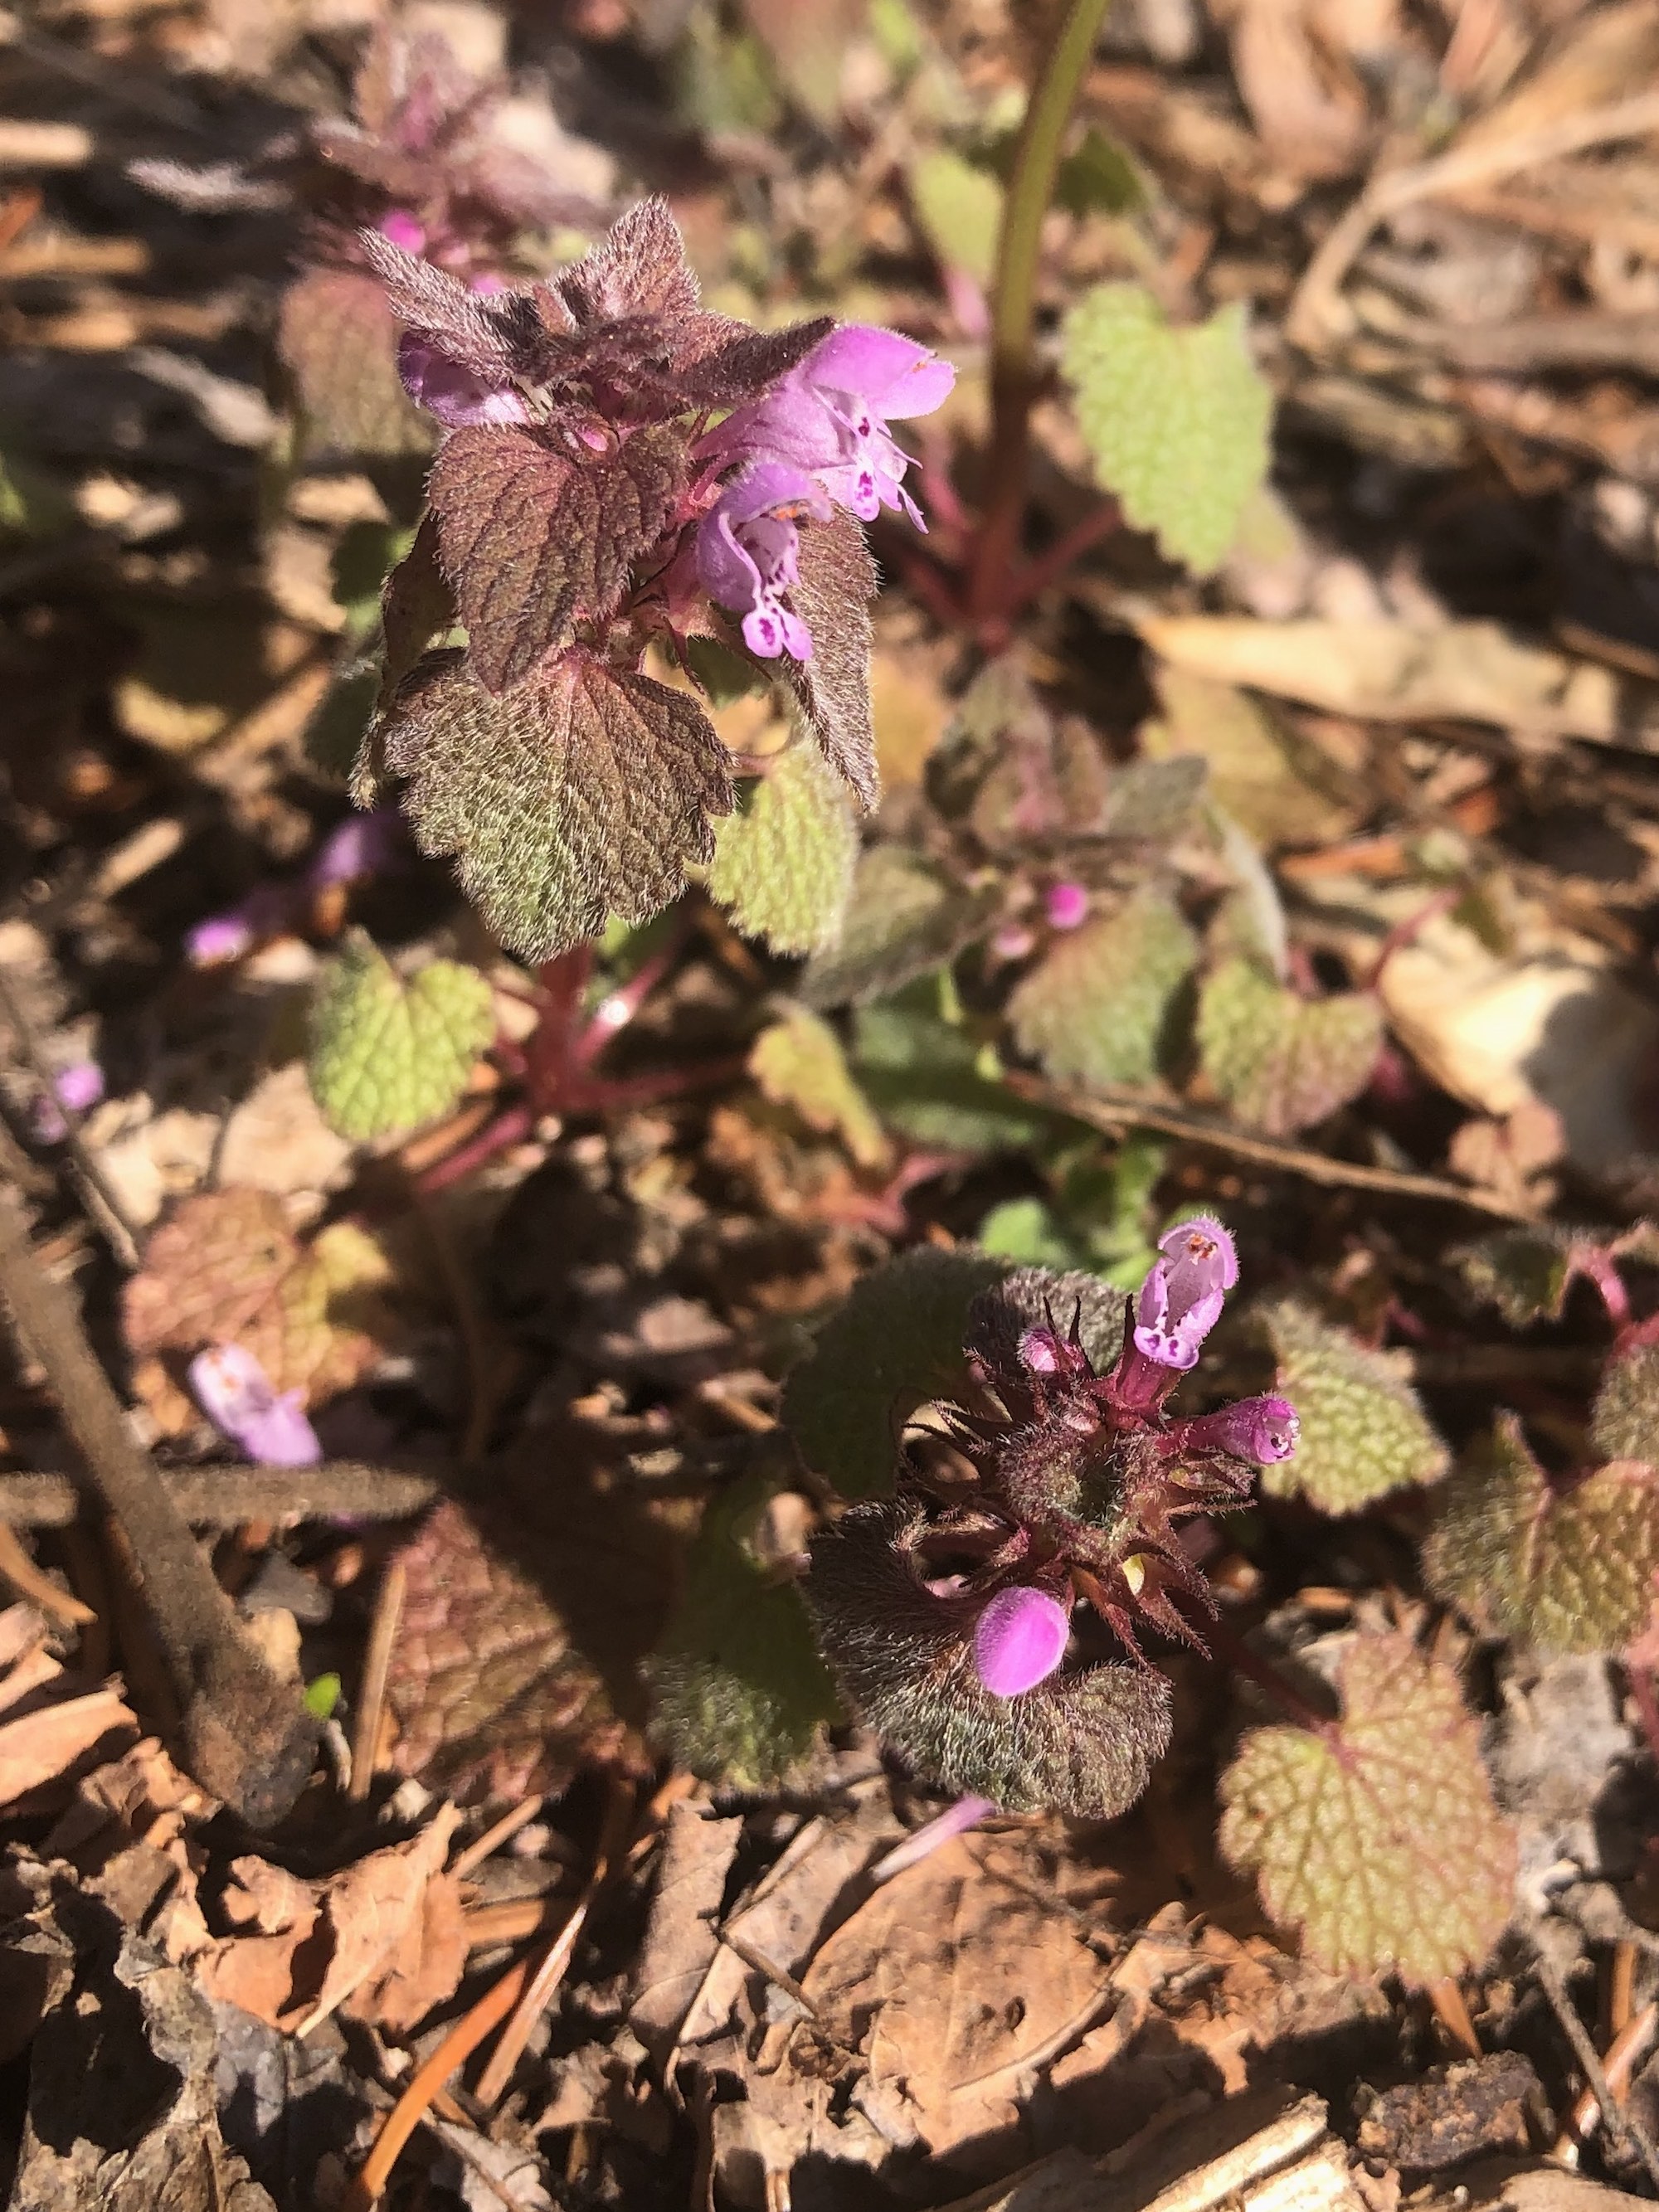 Purple Dead-Nettles in the E. Ray Stevens Pond and Aquatic Gardens area in the U.W. Arboretum in Madison, Wisconsin on April 17, 2021.